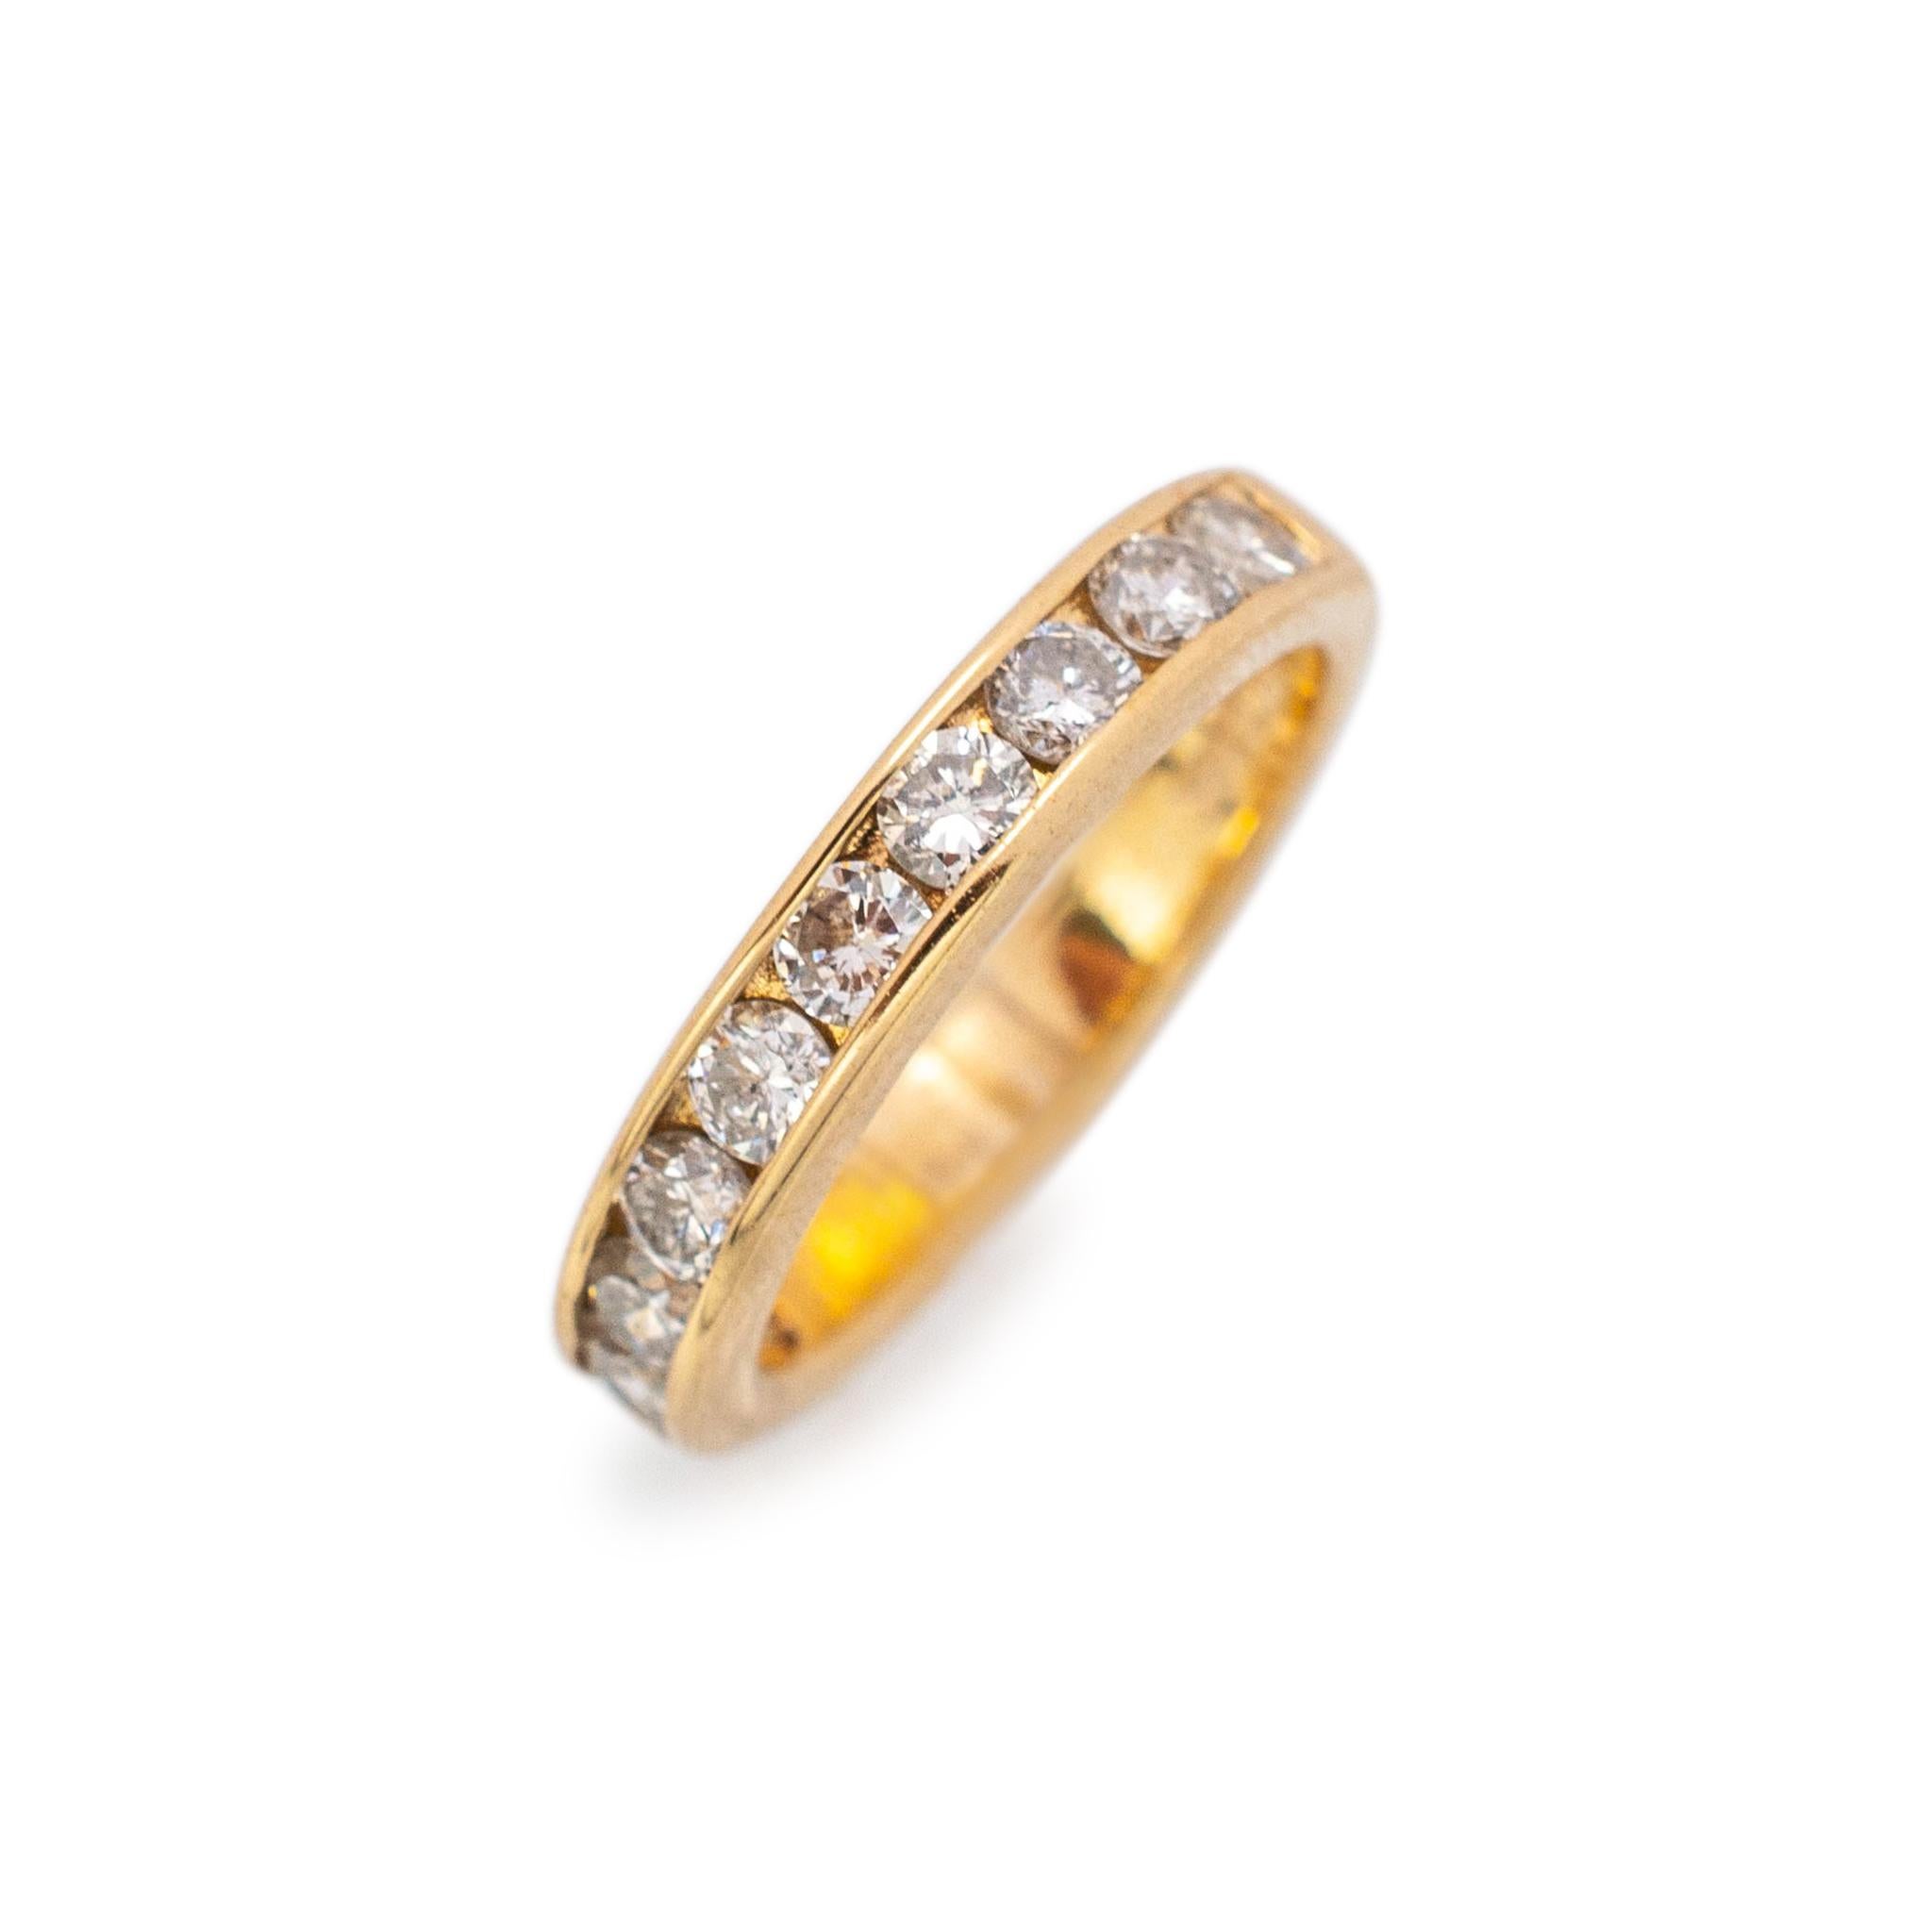 Gender: Ladies

Metal Type: 14K Yellow Gold

Size: 6

Shank Width: 3.55mm

Weight: 3.80 grams

14K yellow gold diamond wedding band with a soft-square shank. Engraved with 